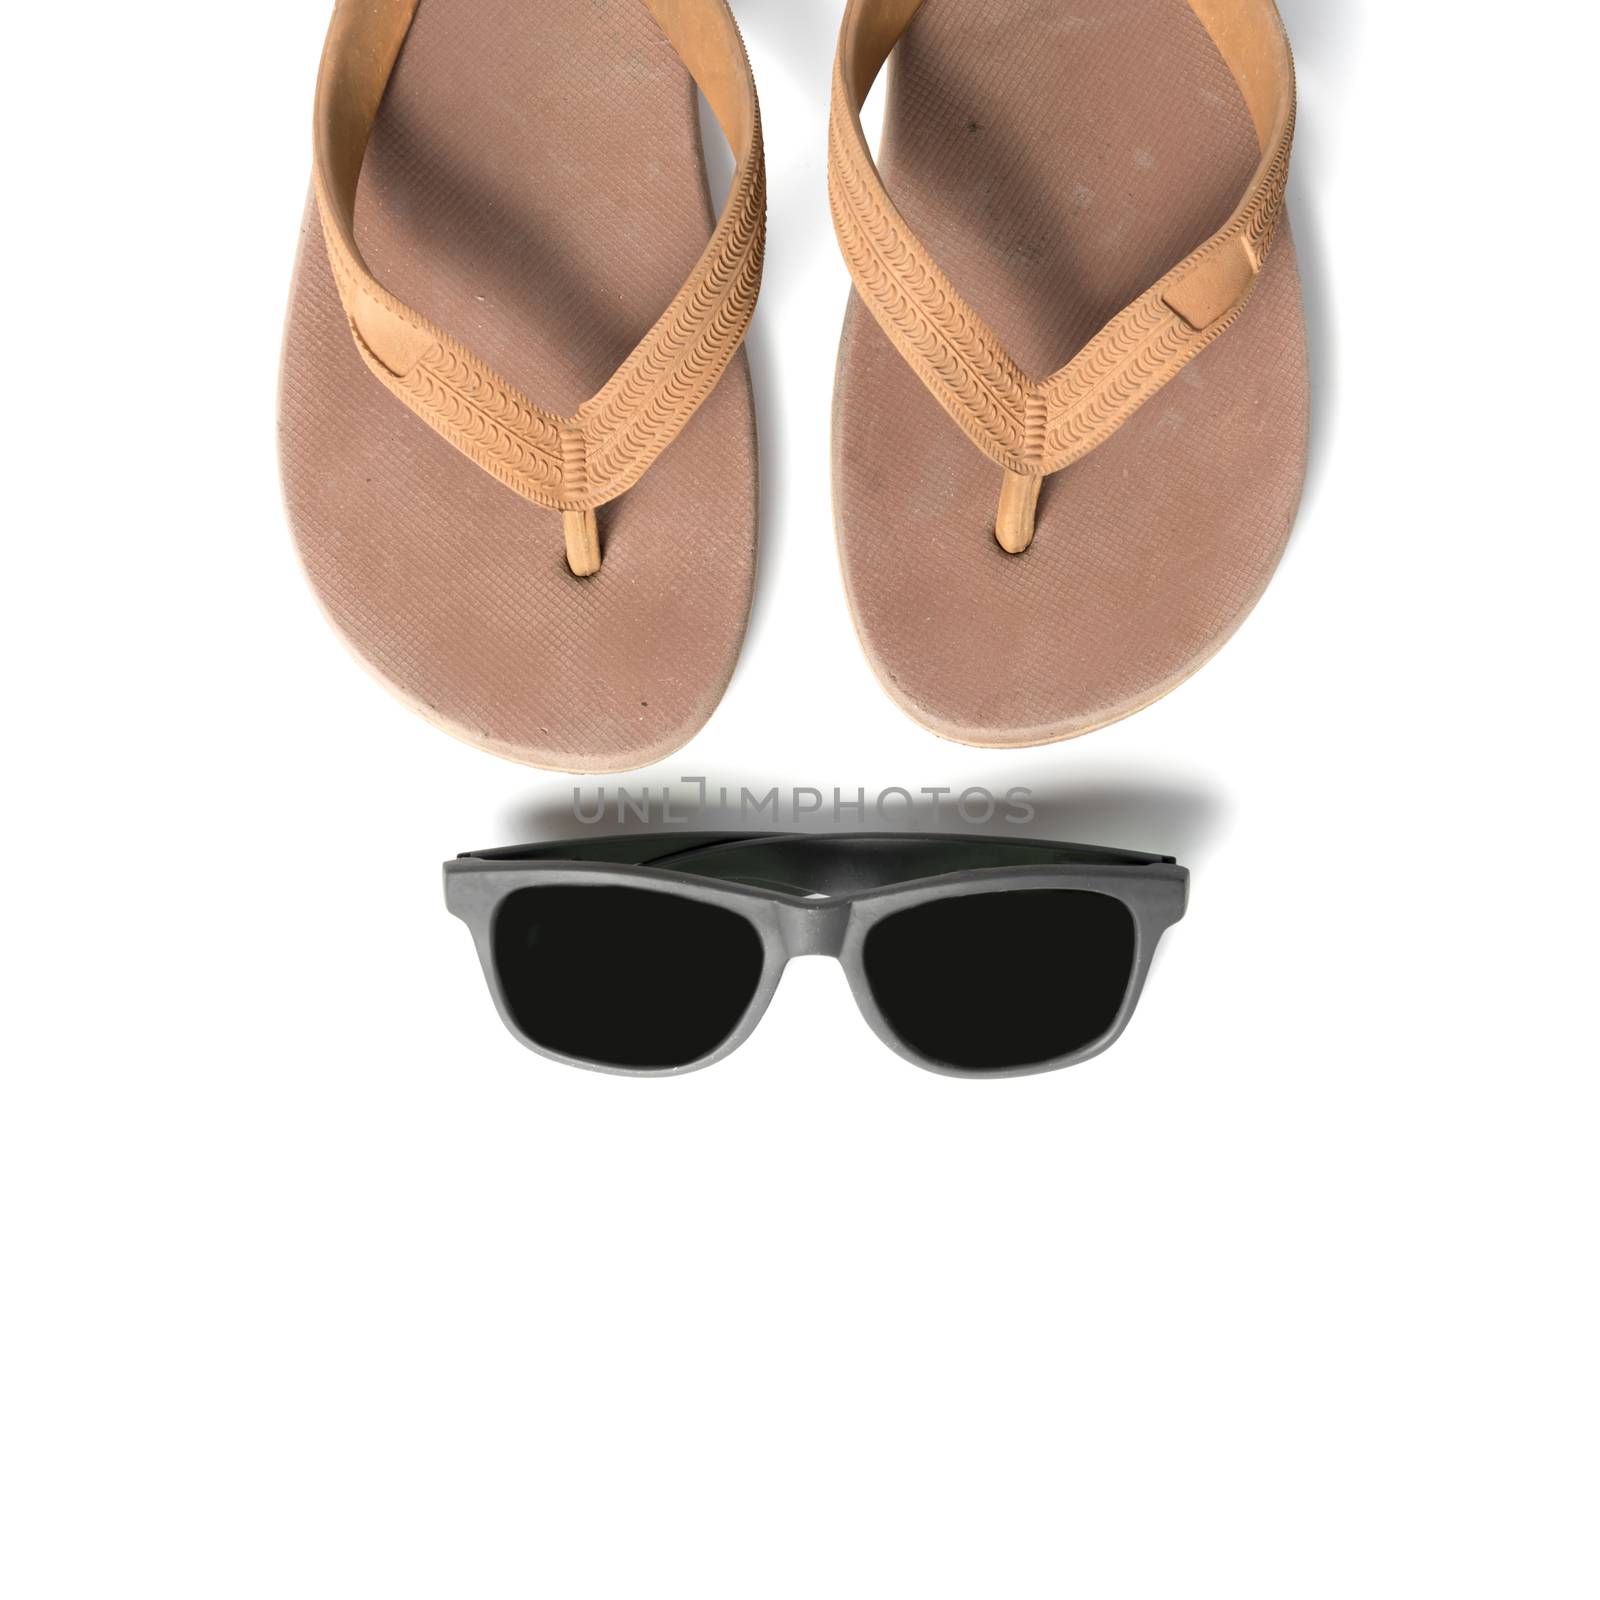 sunglasses and slippers isolated on white background